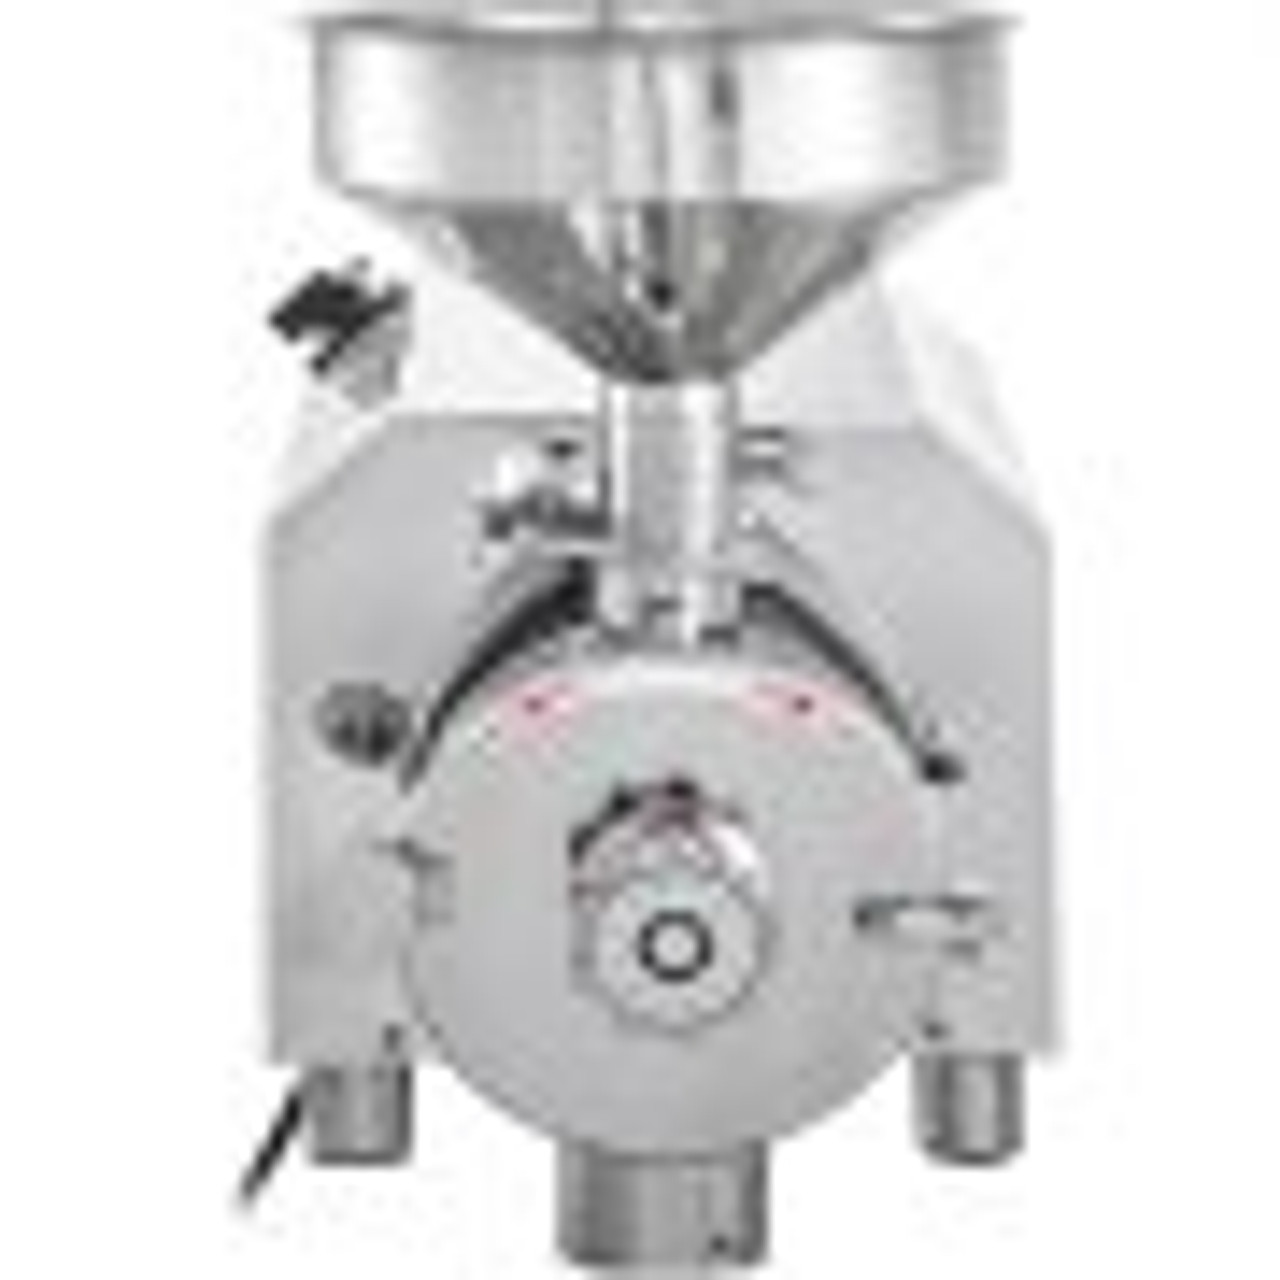 300g Electric Grain Mill Grinder, High Speed 1900W Commercial